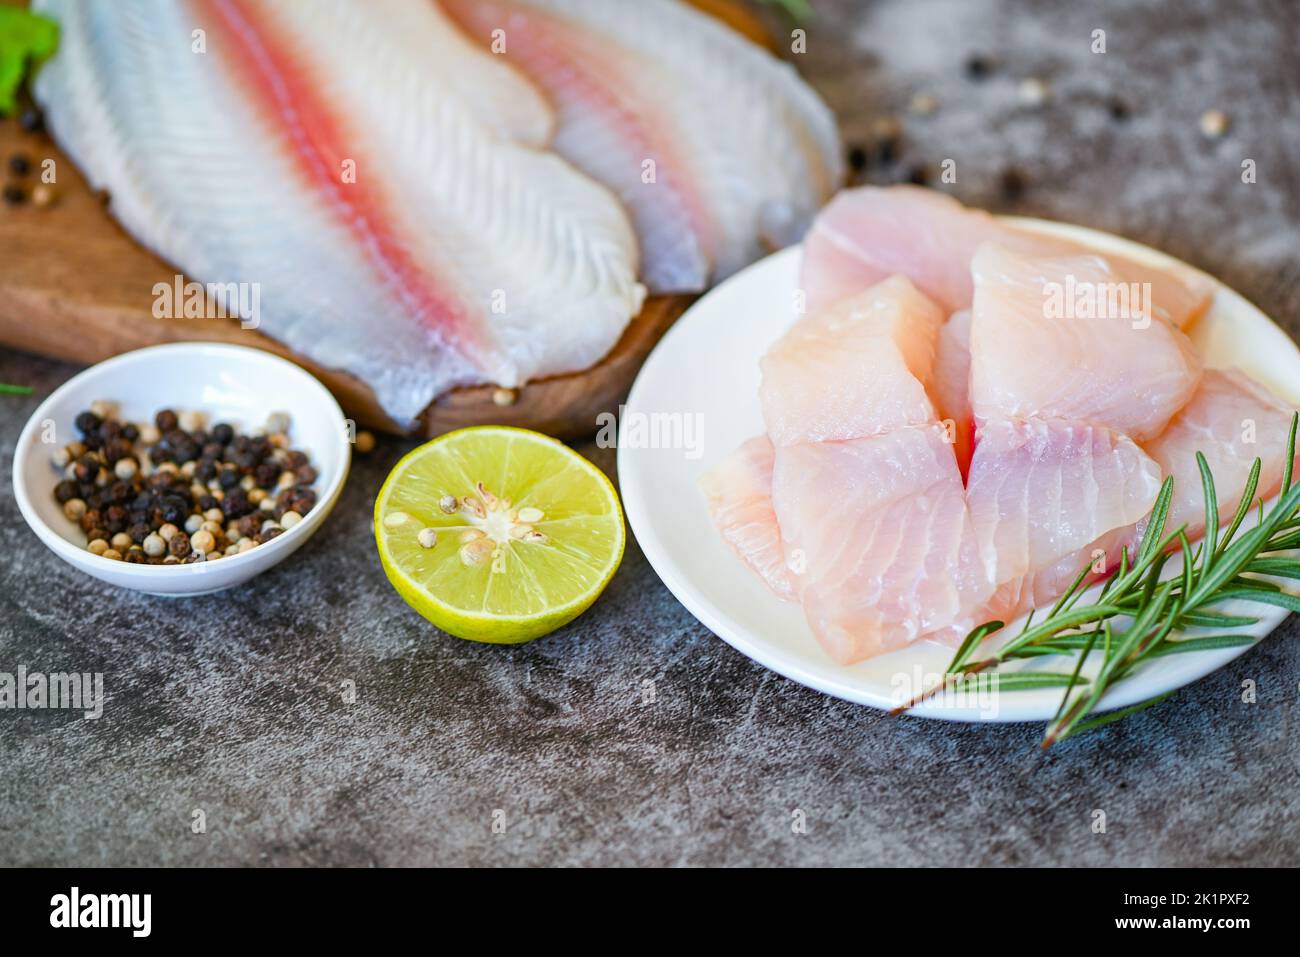 fresh raw pangasius fish fillet with herb and spices lemon lime and rosemary, meat dolly fish tilapia striped catfish, fish fillet on white plate with Stock Photo